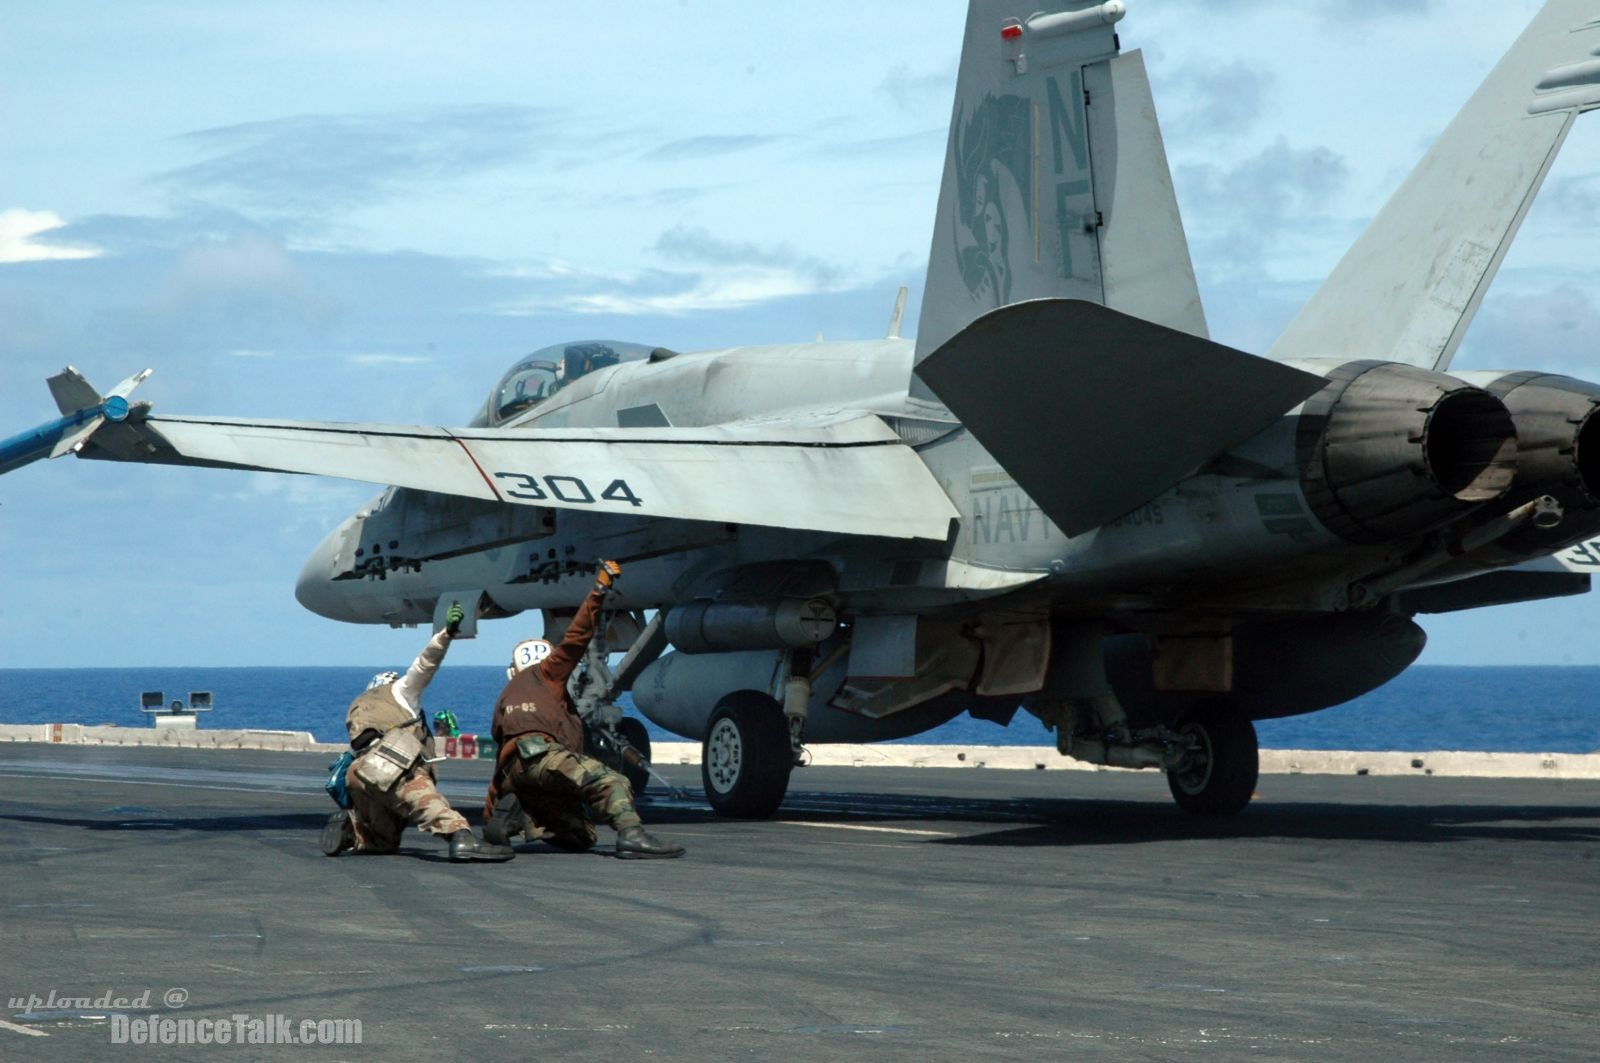 F/A-18C Hornet is ready to launch - Valiant Shield 2006